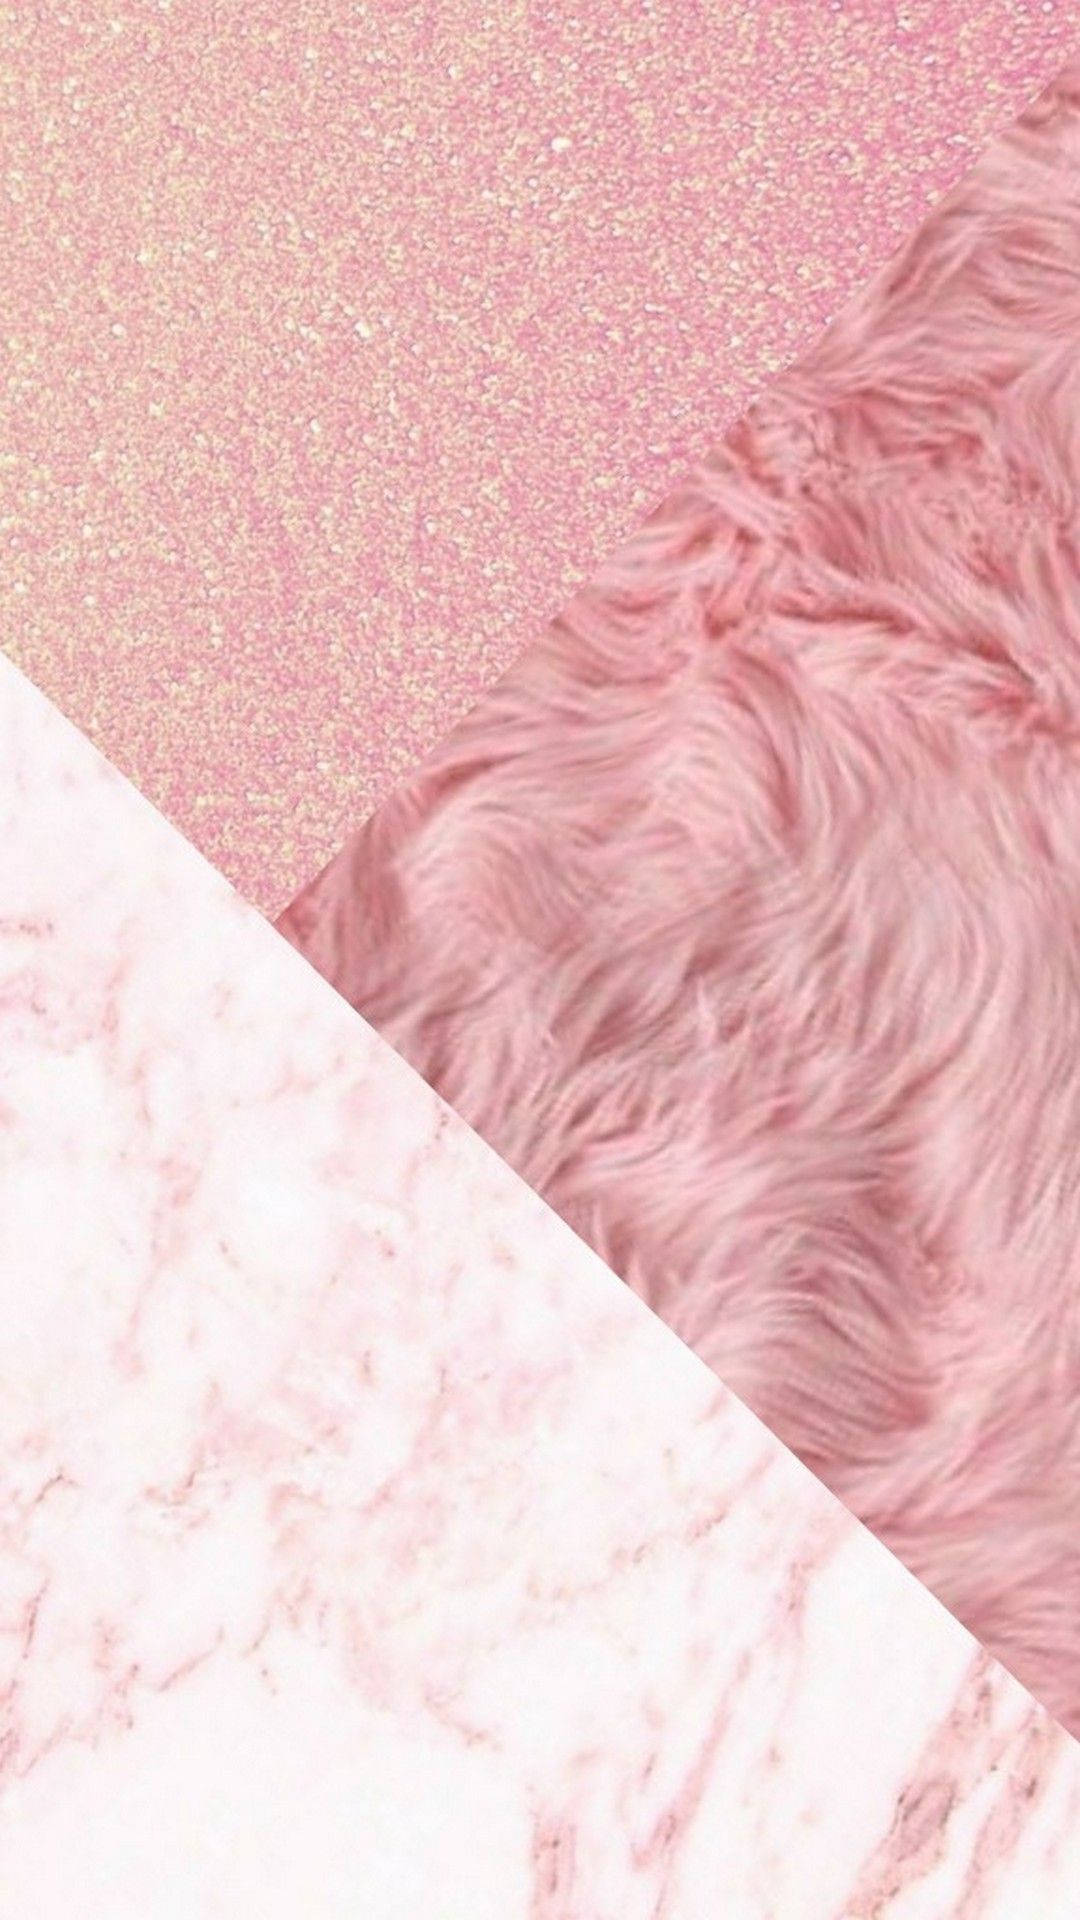 Cute Pink Aesthetic Background Textures Collage Wallpaper